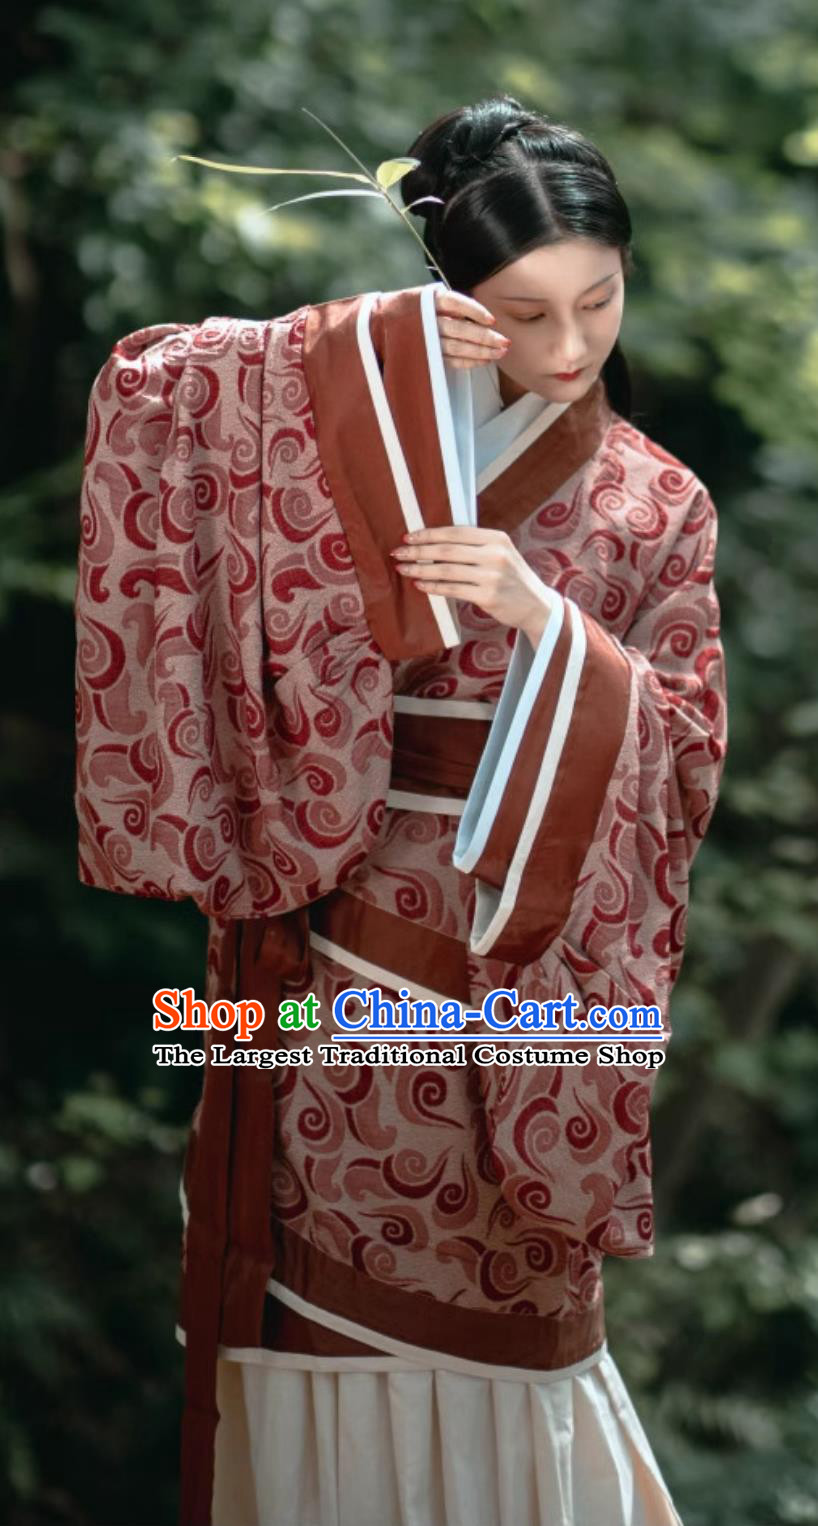 Traditional Hanfu Curving Front Robe Han Dynasty Princess Dress Ancient China Court Woman Clothing Chinese Travel Photography Costume